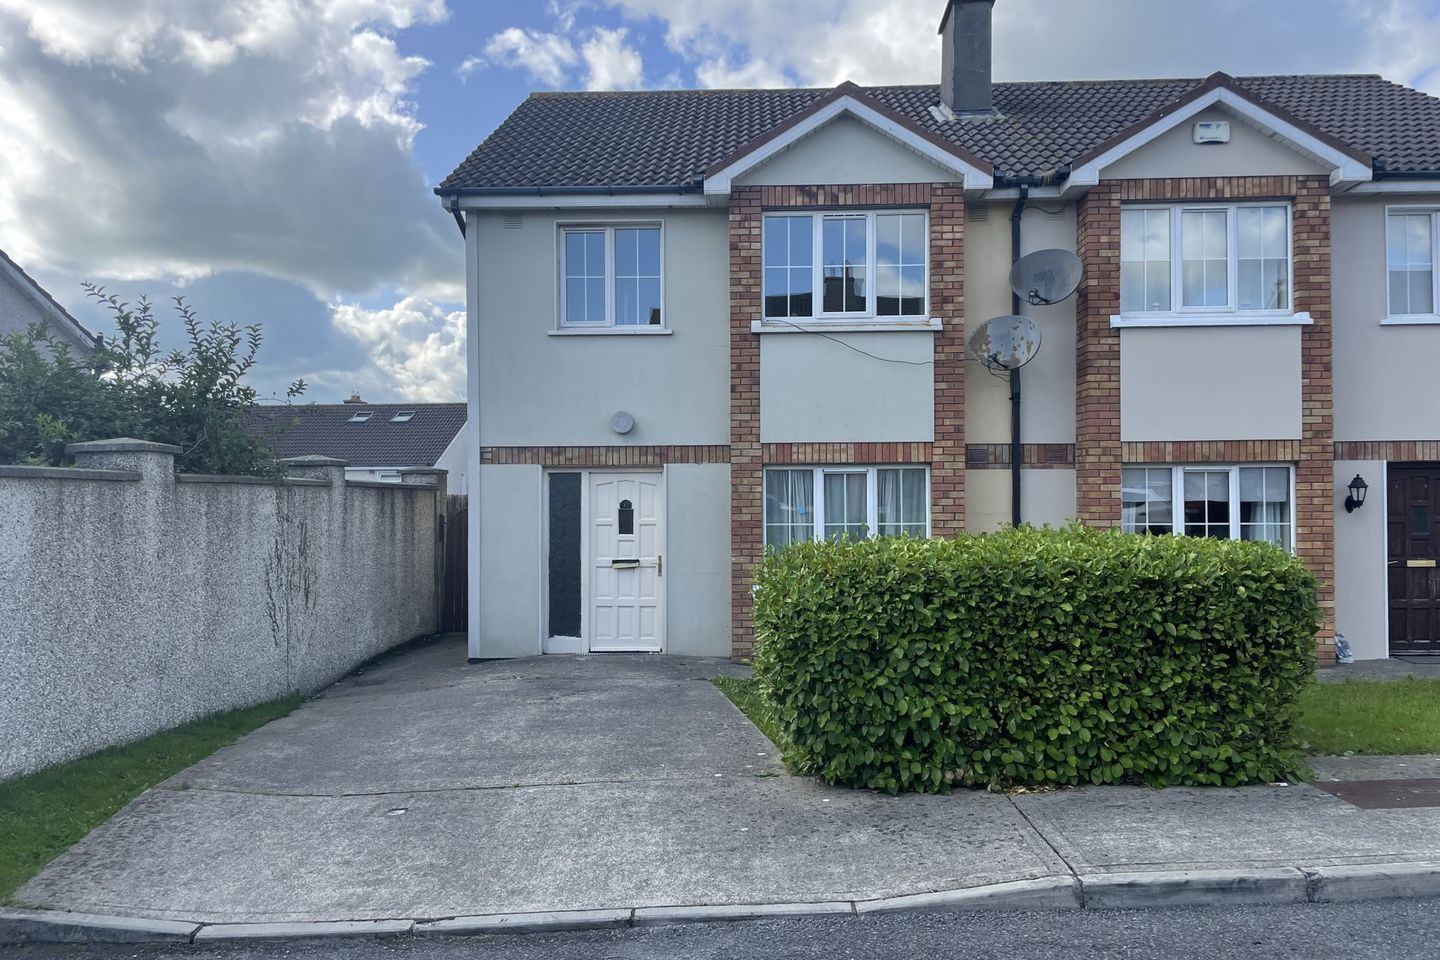 37 The Crescent, Fairfield Park, Waterford City, Co. Waterford, X91PCY5